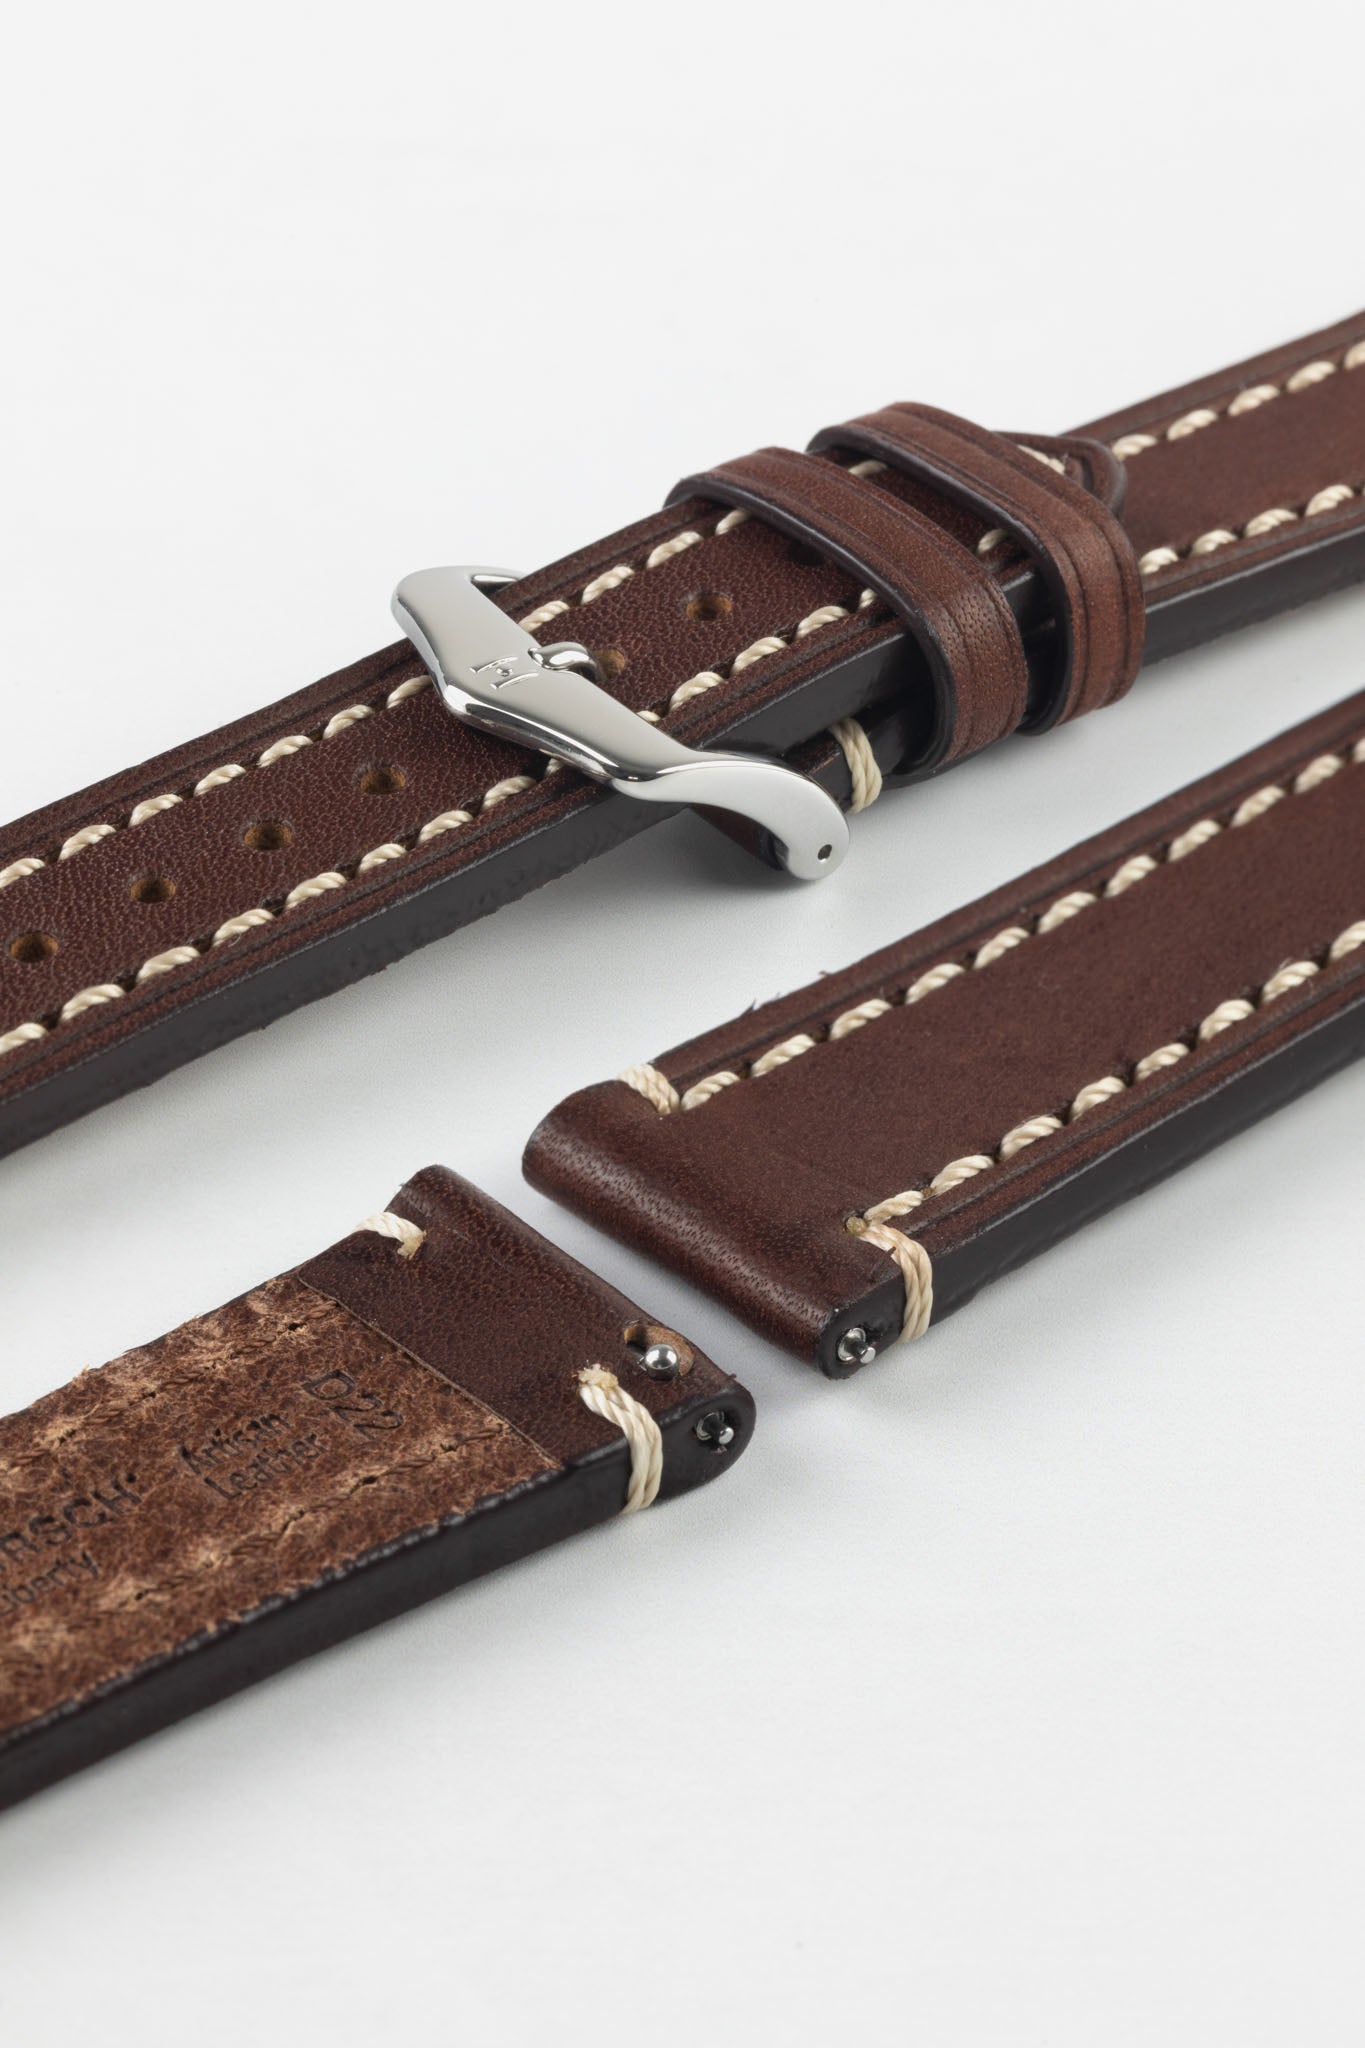 Made in Spain heavy silver tone brown leather belt.